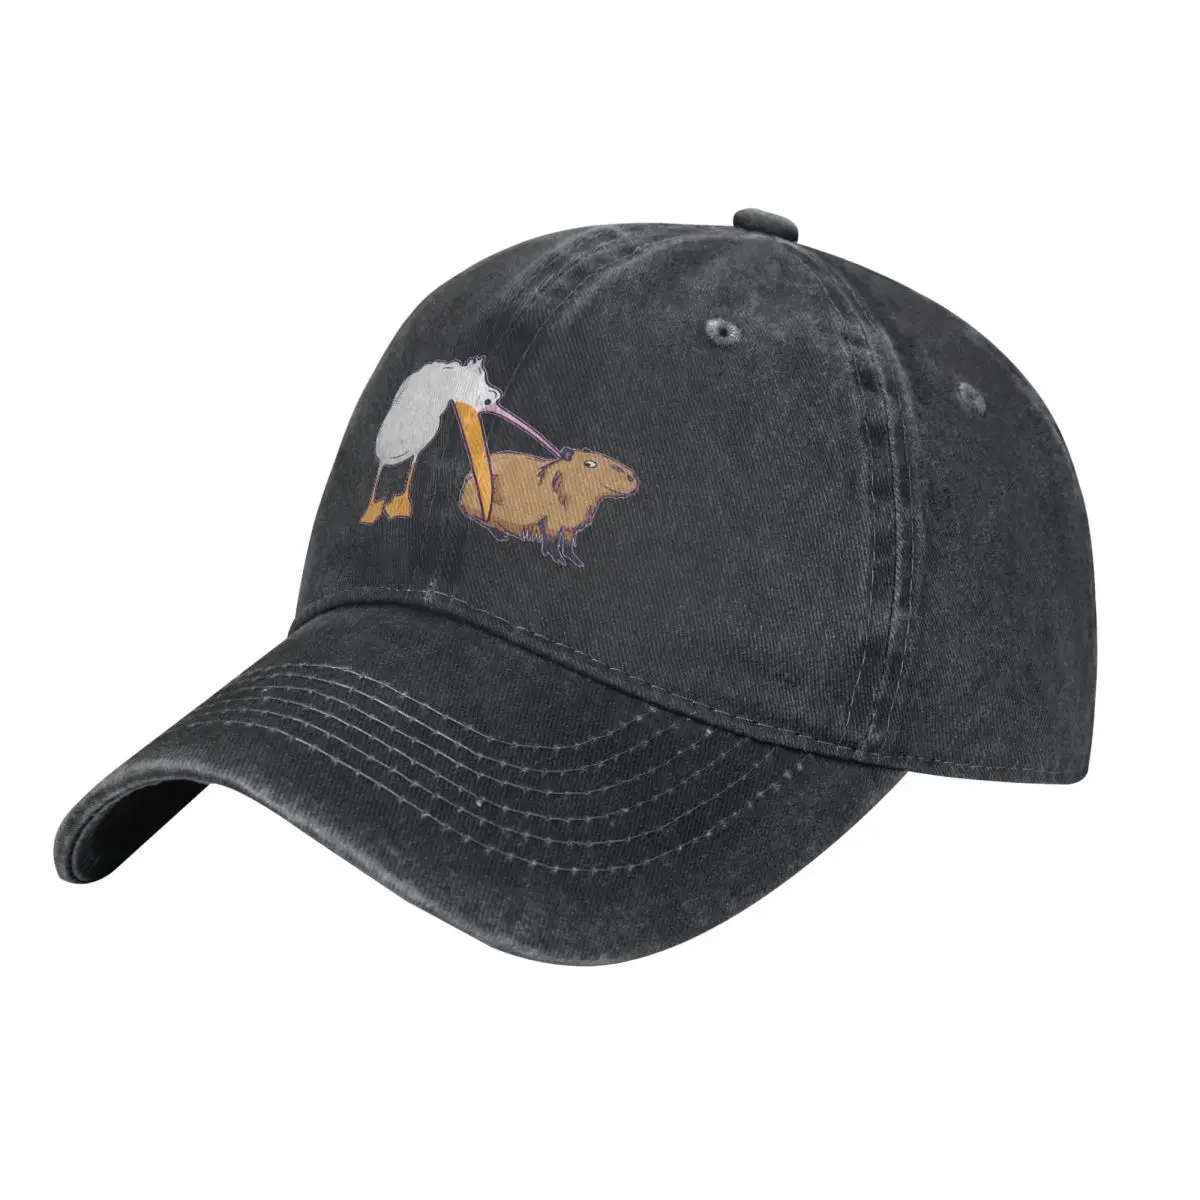 

Don't Worry, Be Capy. Capaybara Unbothered Funny Cowboy Hat Streetwear Kids Hat Trucker Cap Trucker Hats For Men Women's